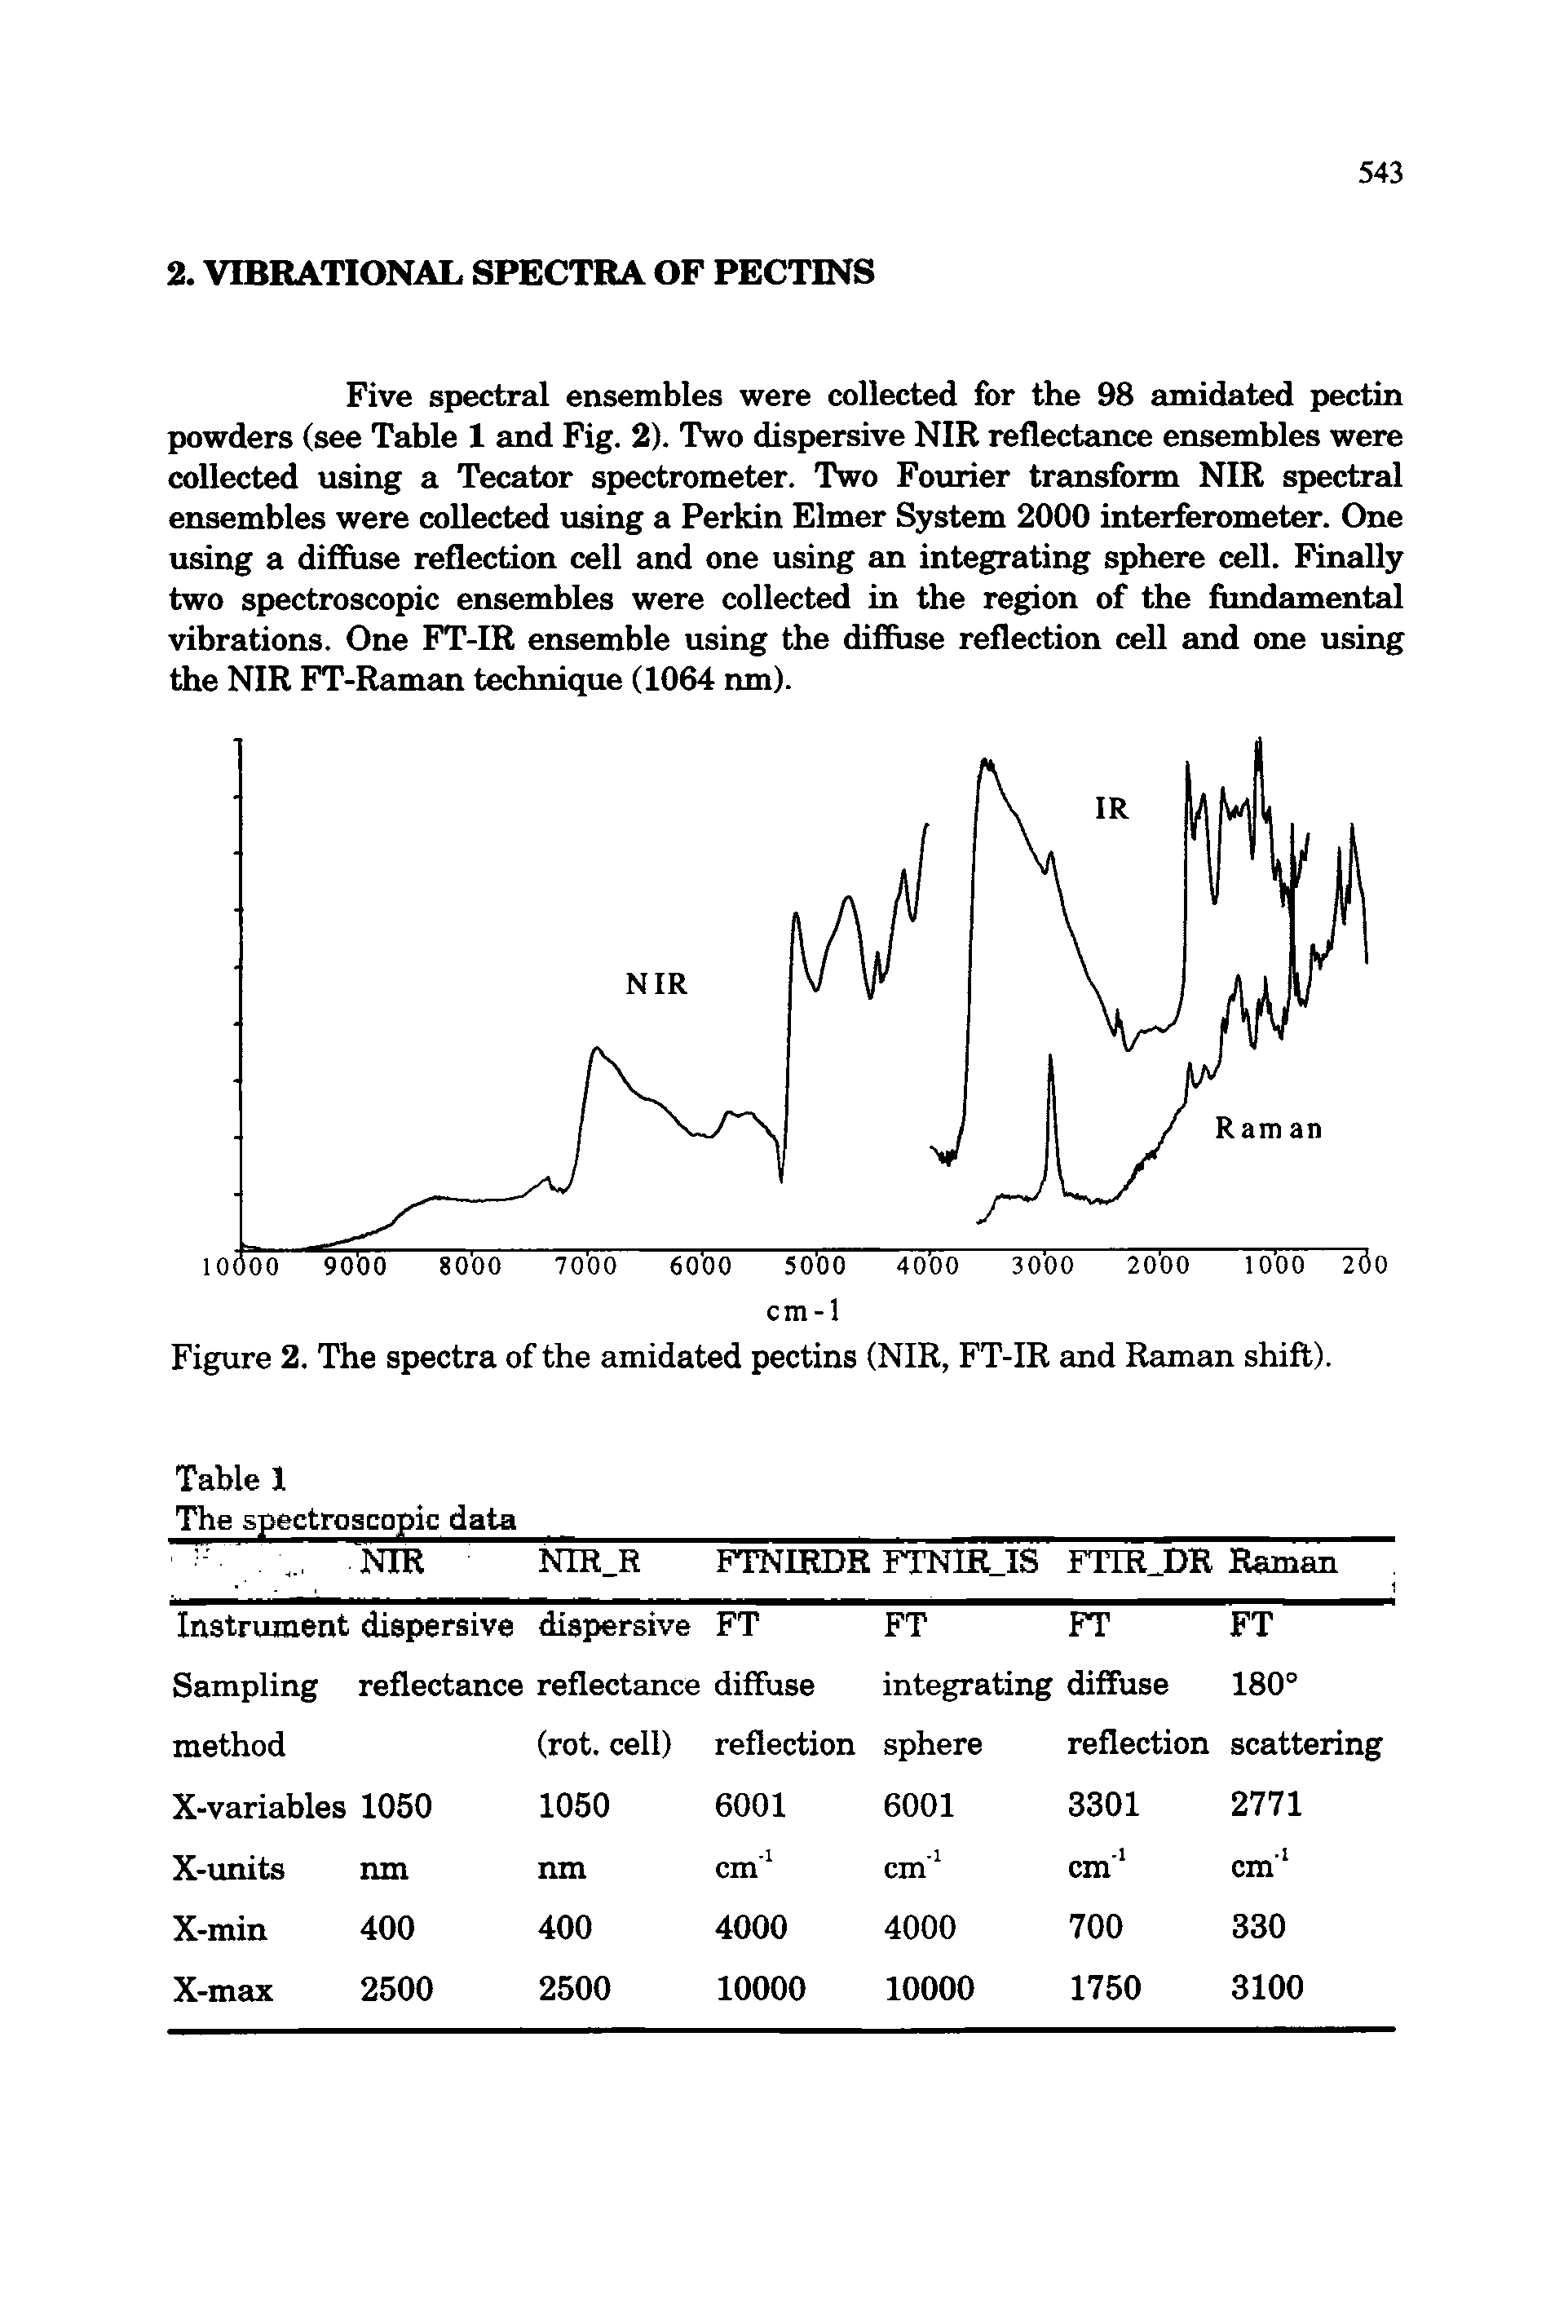 Figure 2. The spectra of the amidated pectins (NIR, FT-IR and Raman shift).